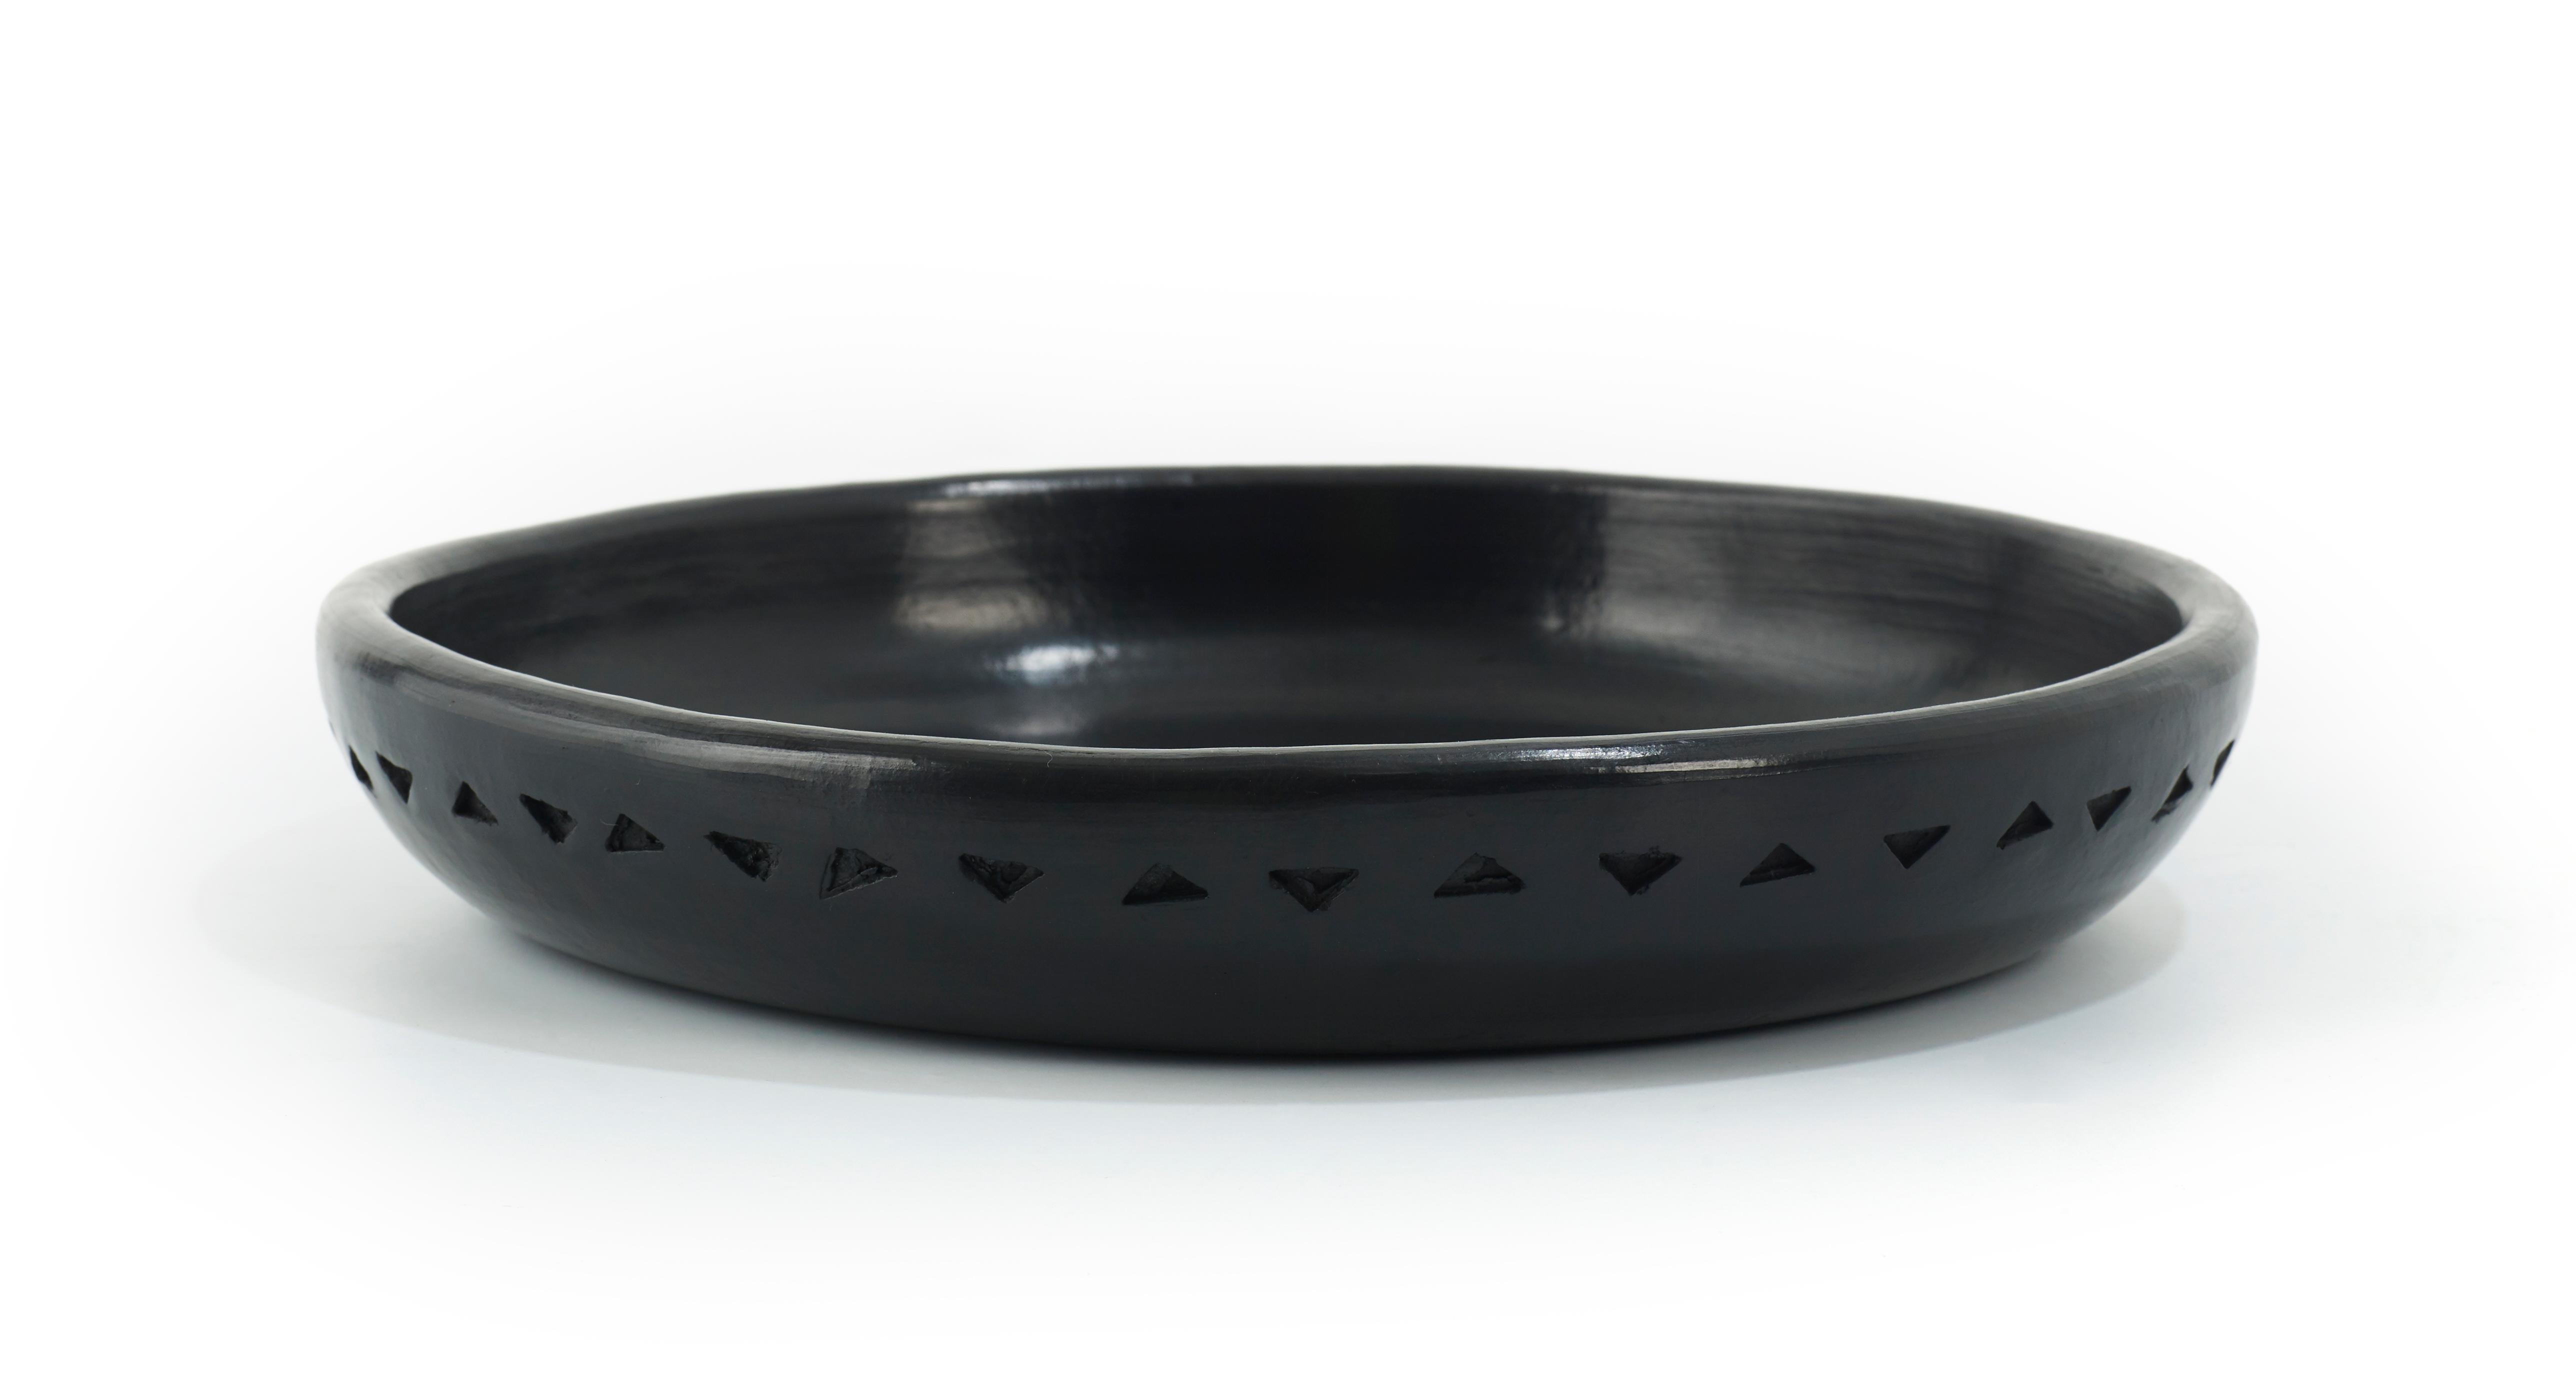 Plate 4 bowl barro dining by Sebastian Herkner
Materials: Heat-resistant black ceramic. 
Technique: Glazed. Oven cooked and polished with semi-precious stones. 
Dimensions: Diameter 26 cm x height 4 cm 
Available in other sizes.

This plate belongs